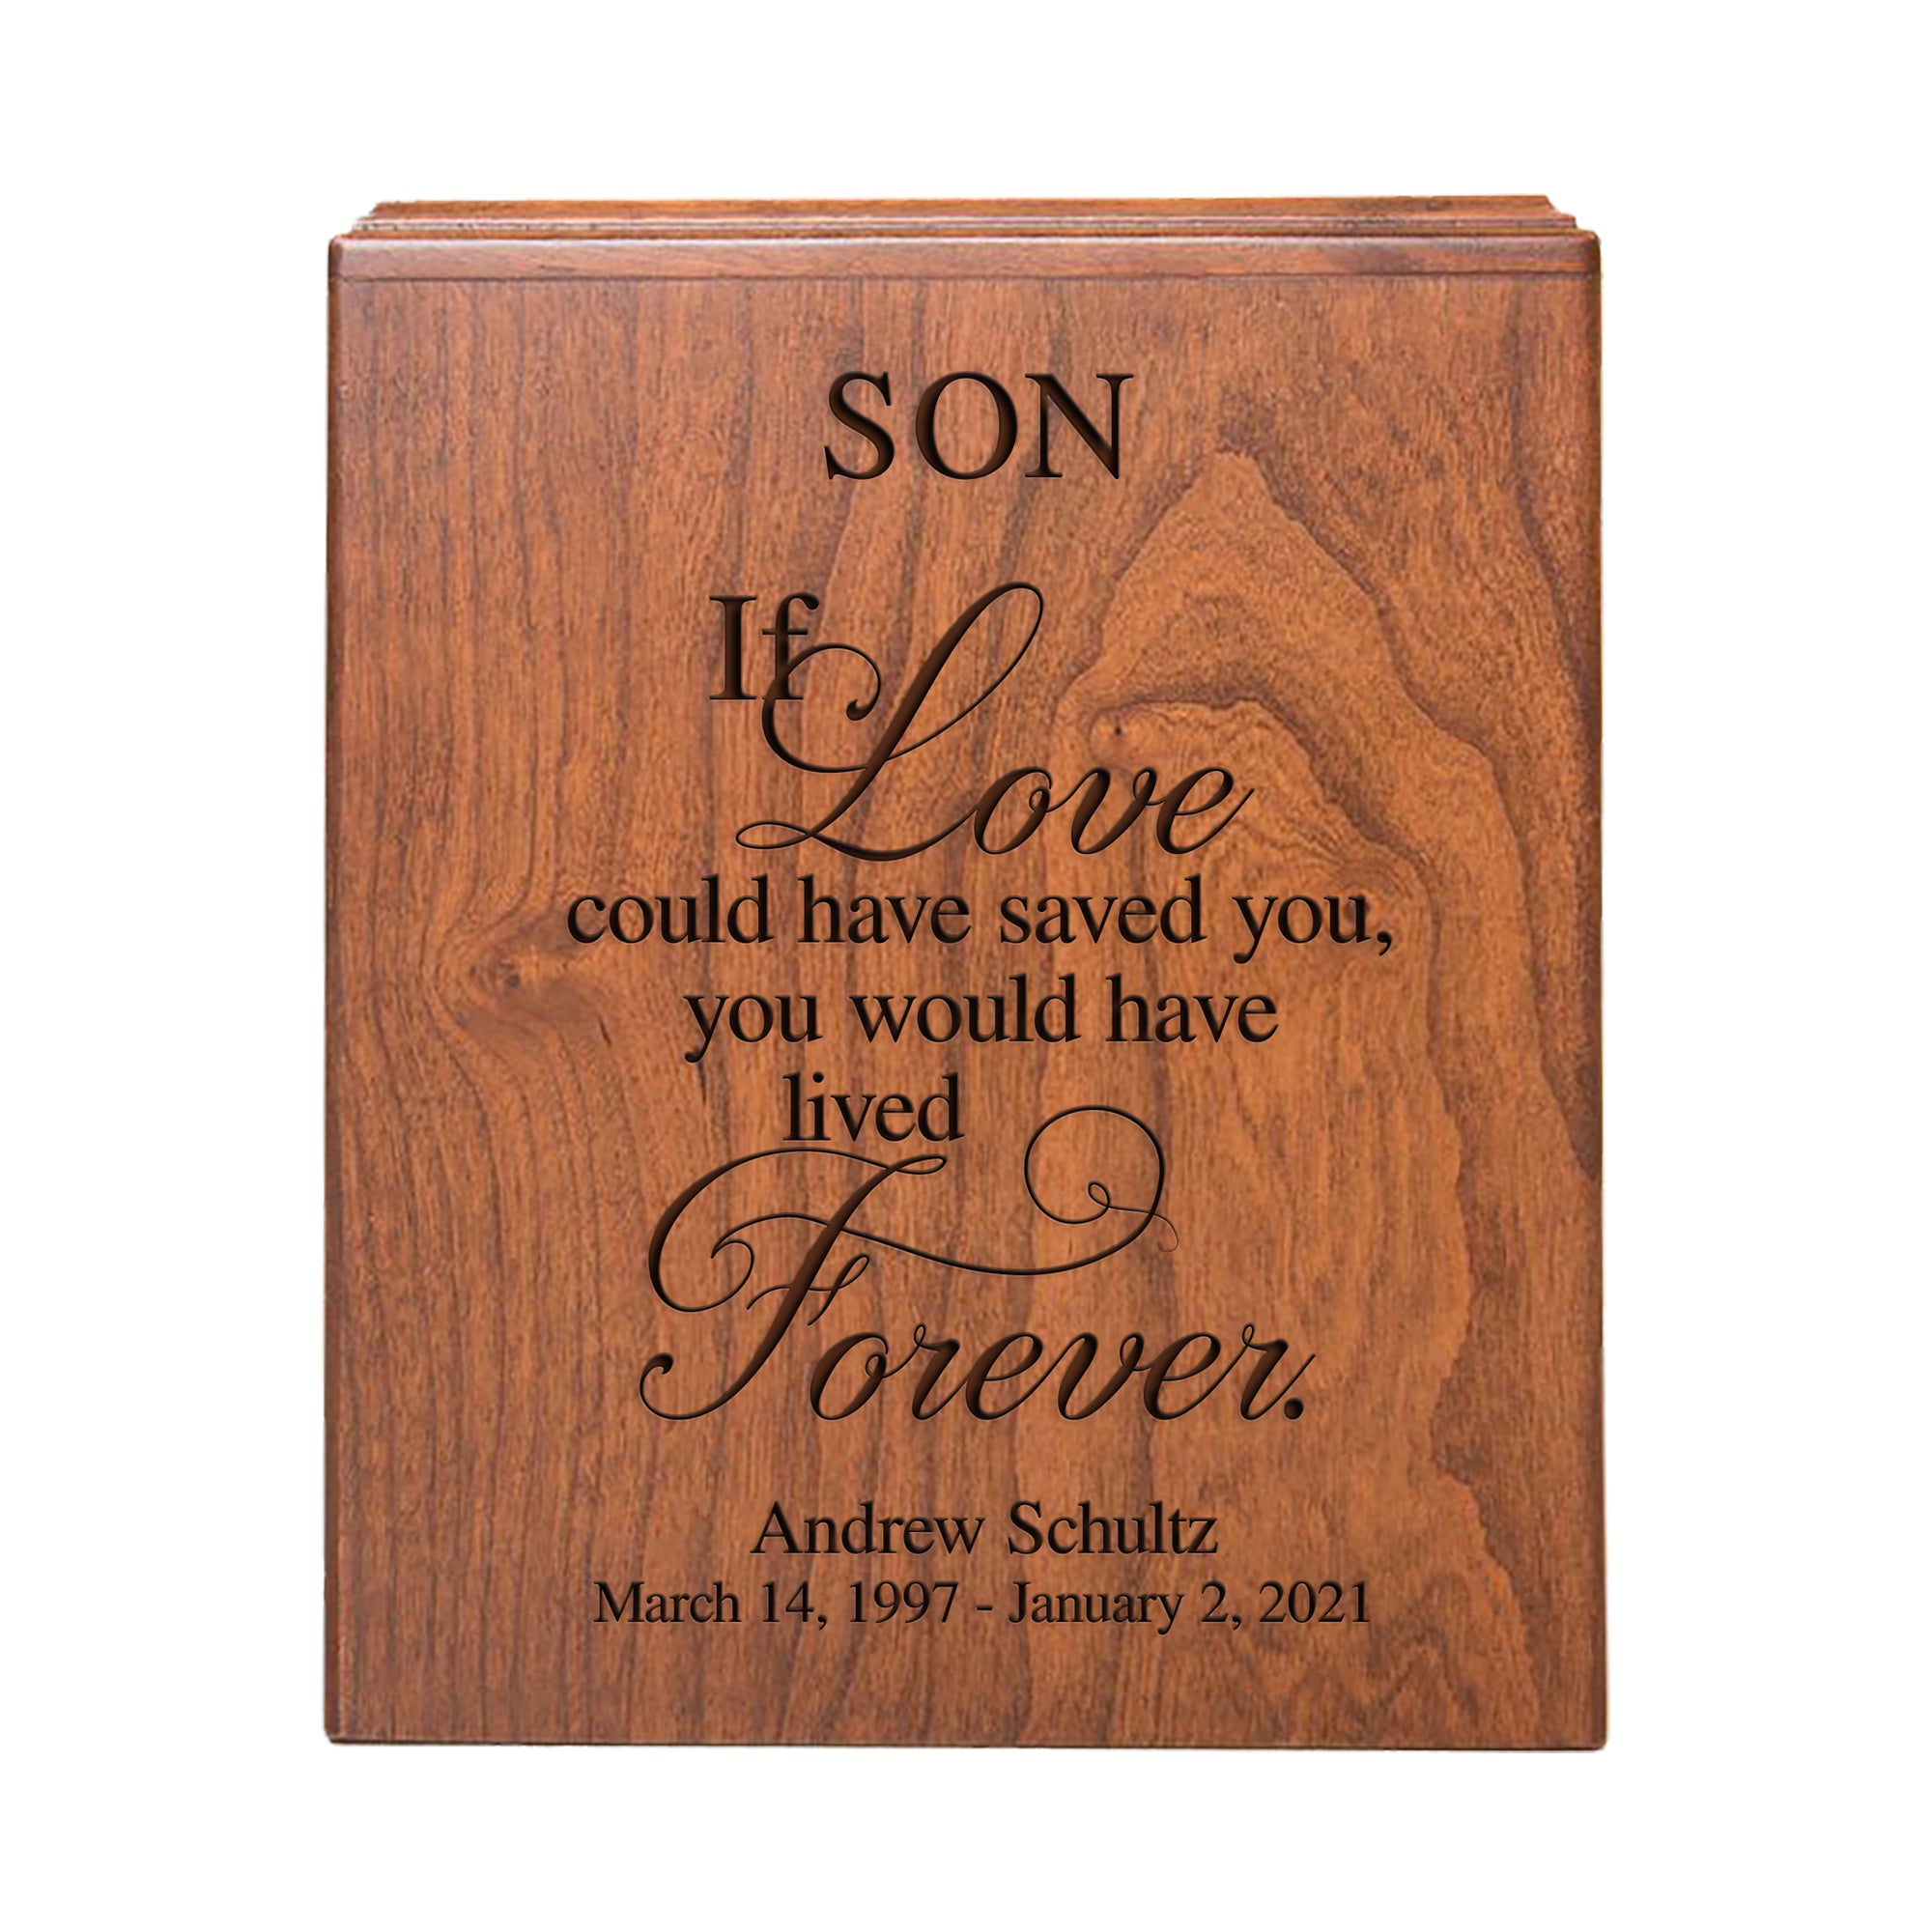 LifeSong Milestones Personalized Memorial Urn Box for Human Ashes holds 280 cu in If Love Could Bereavement Keepsake Box Family Condolence Gift - 7.75” x 9.5” x 5.75”